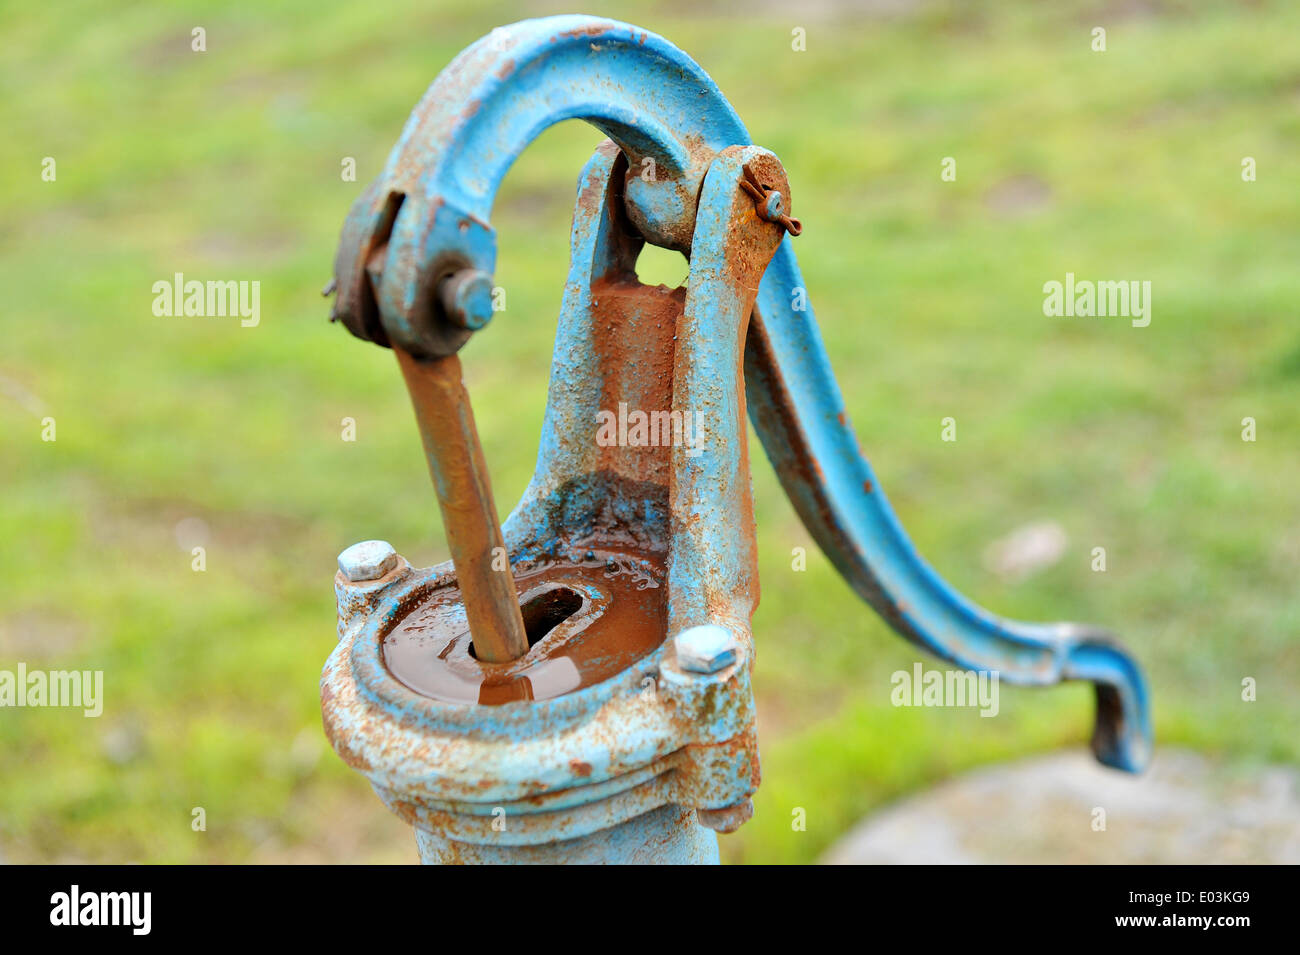 Old and rusty manual water pump Stock Photo